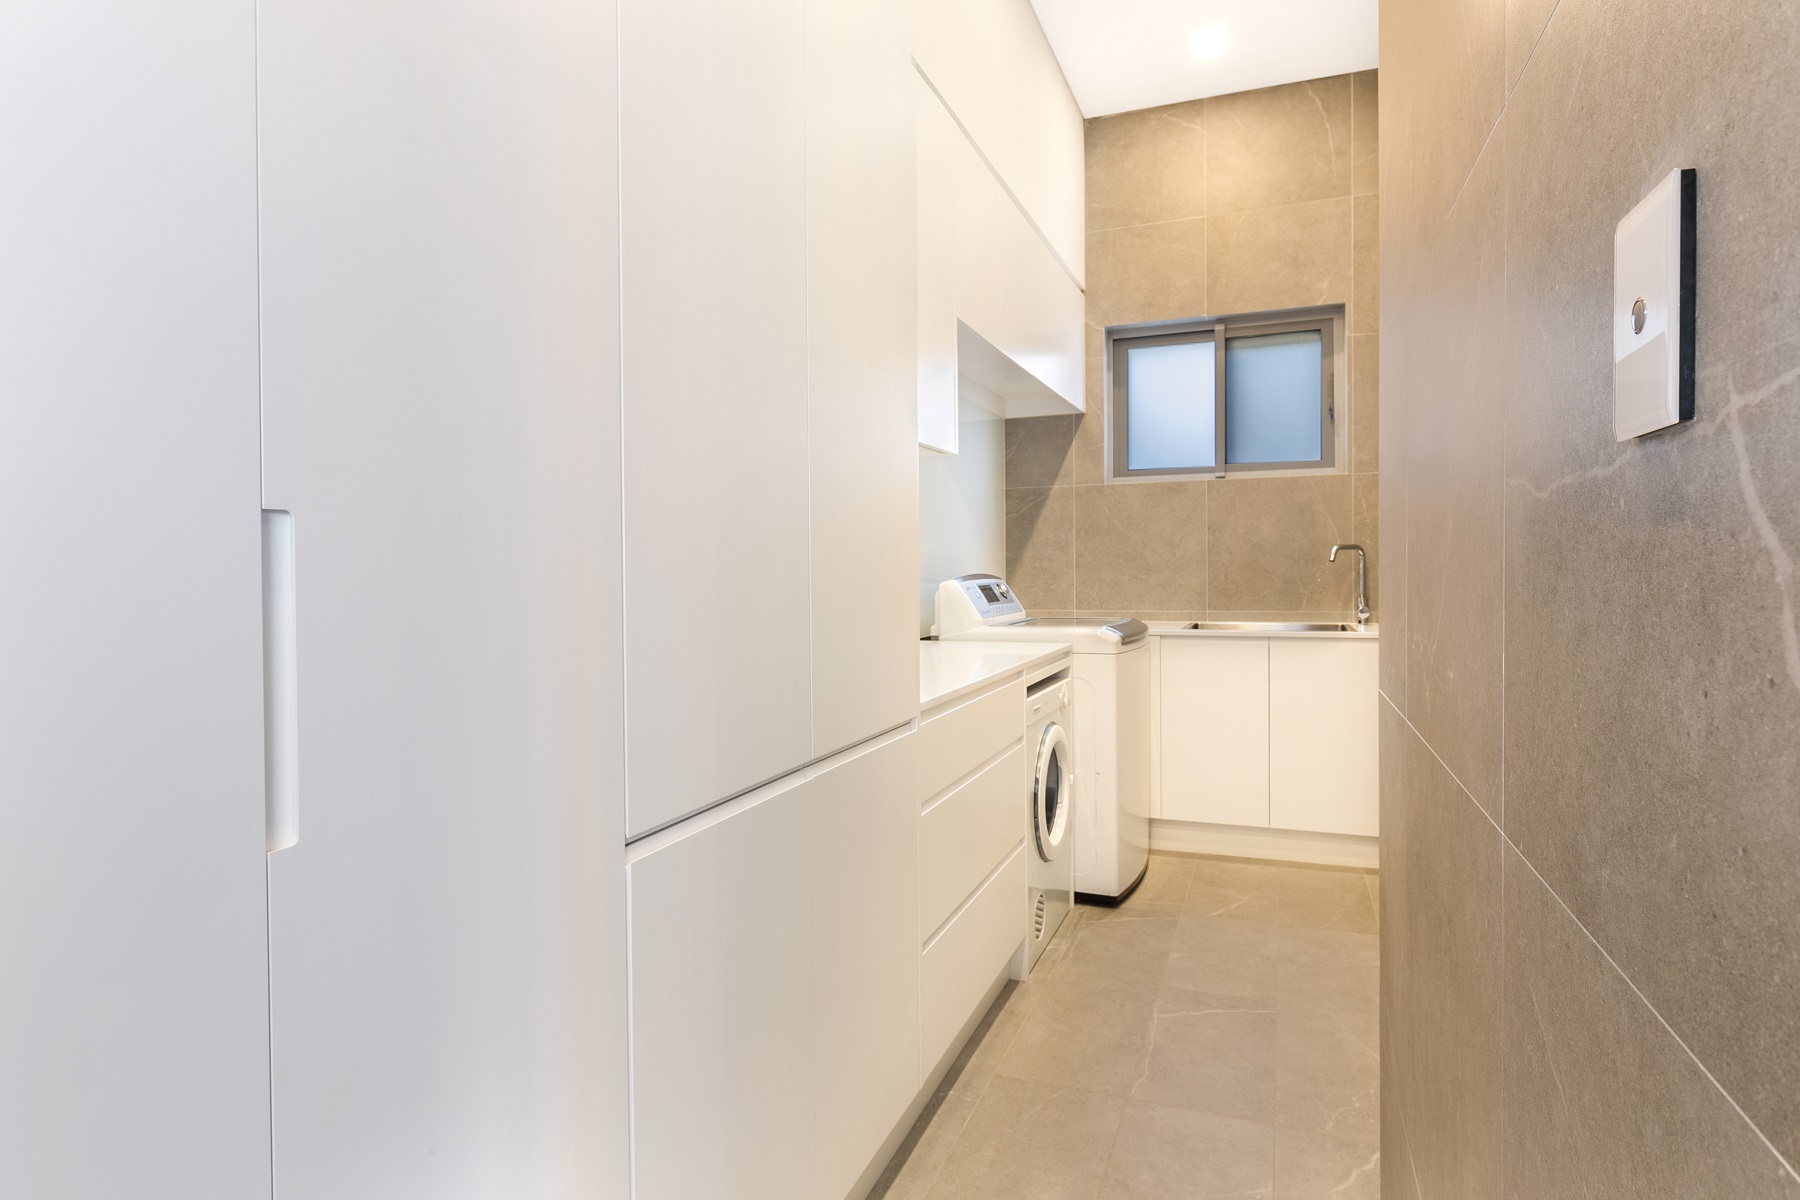 Polyurethane laundry with integrated handles - Guildford, Sydney